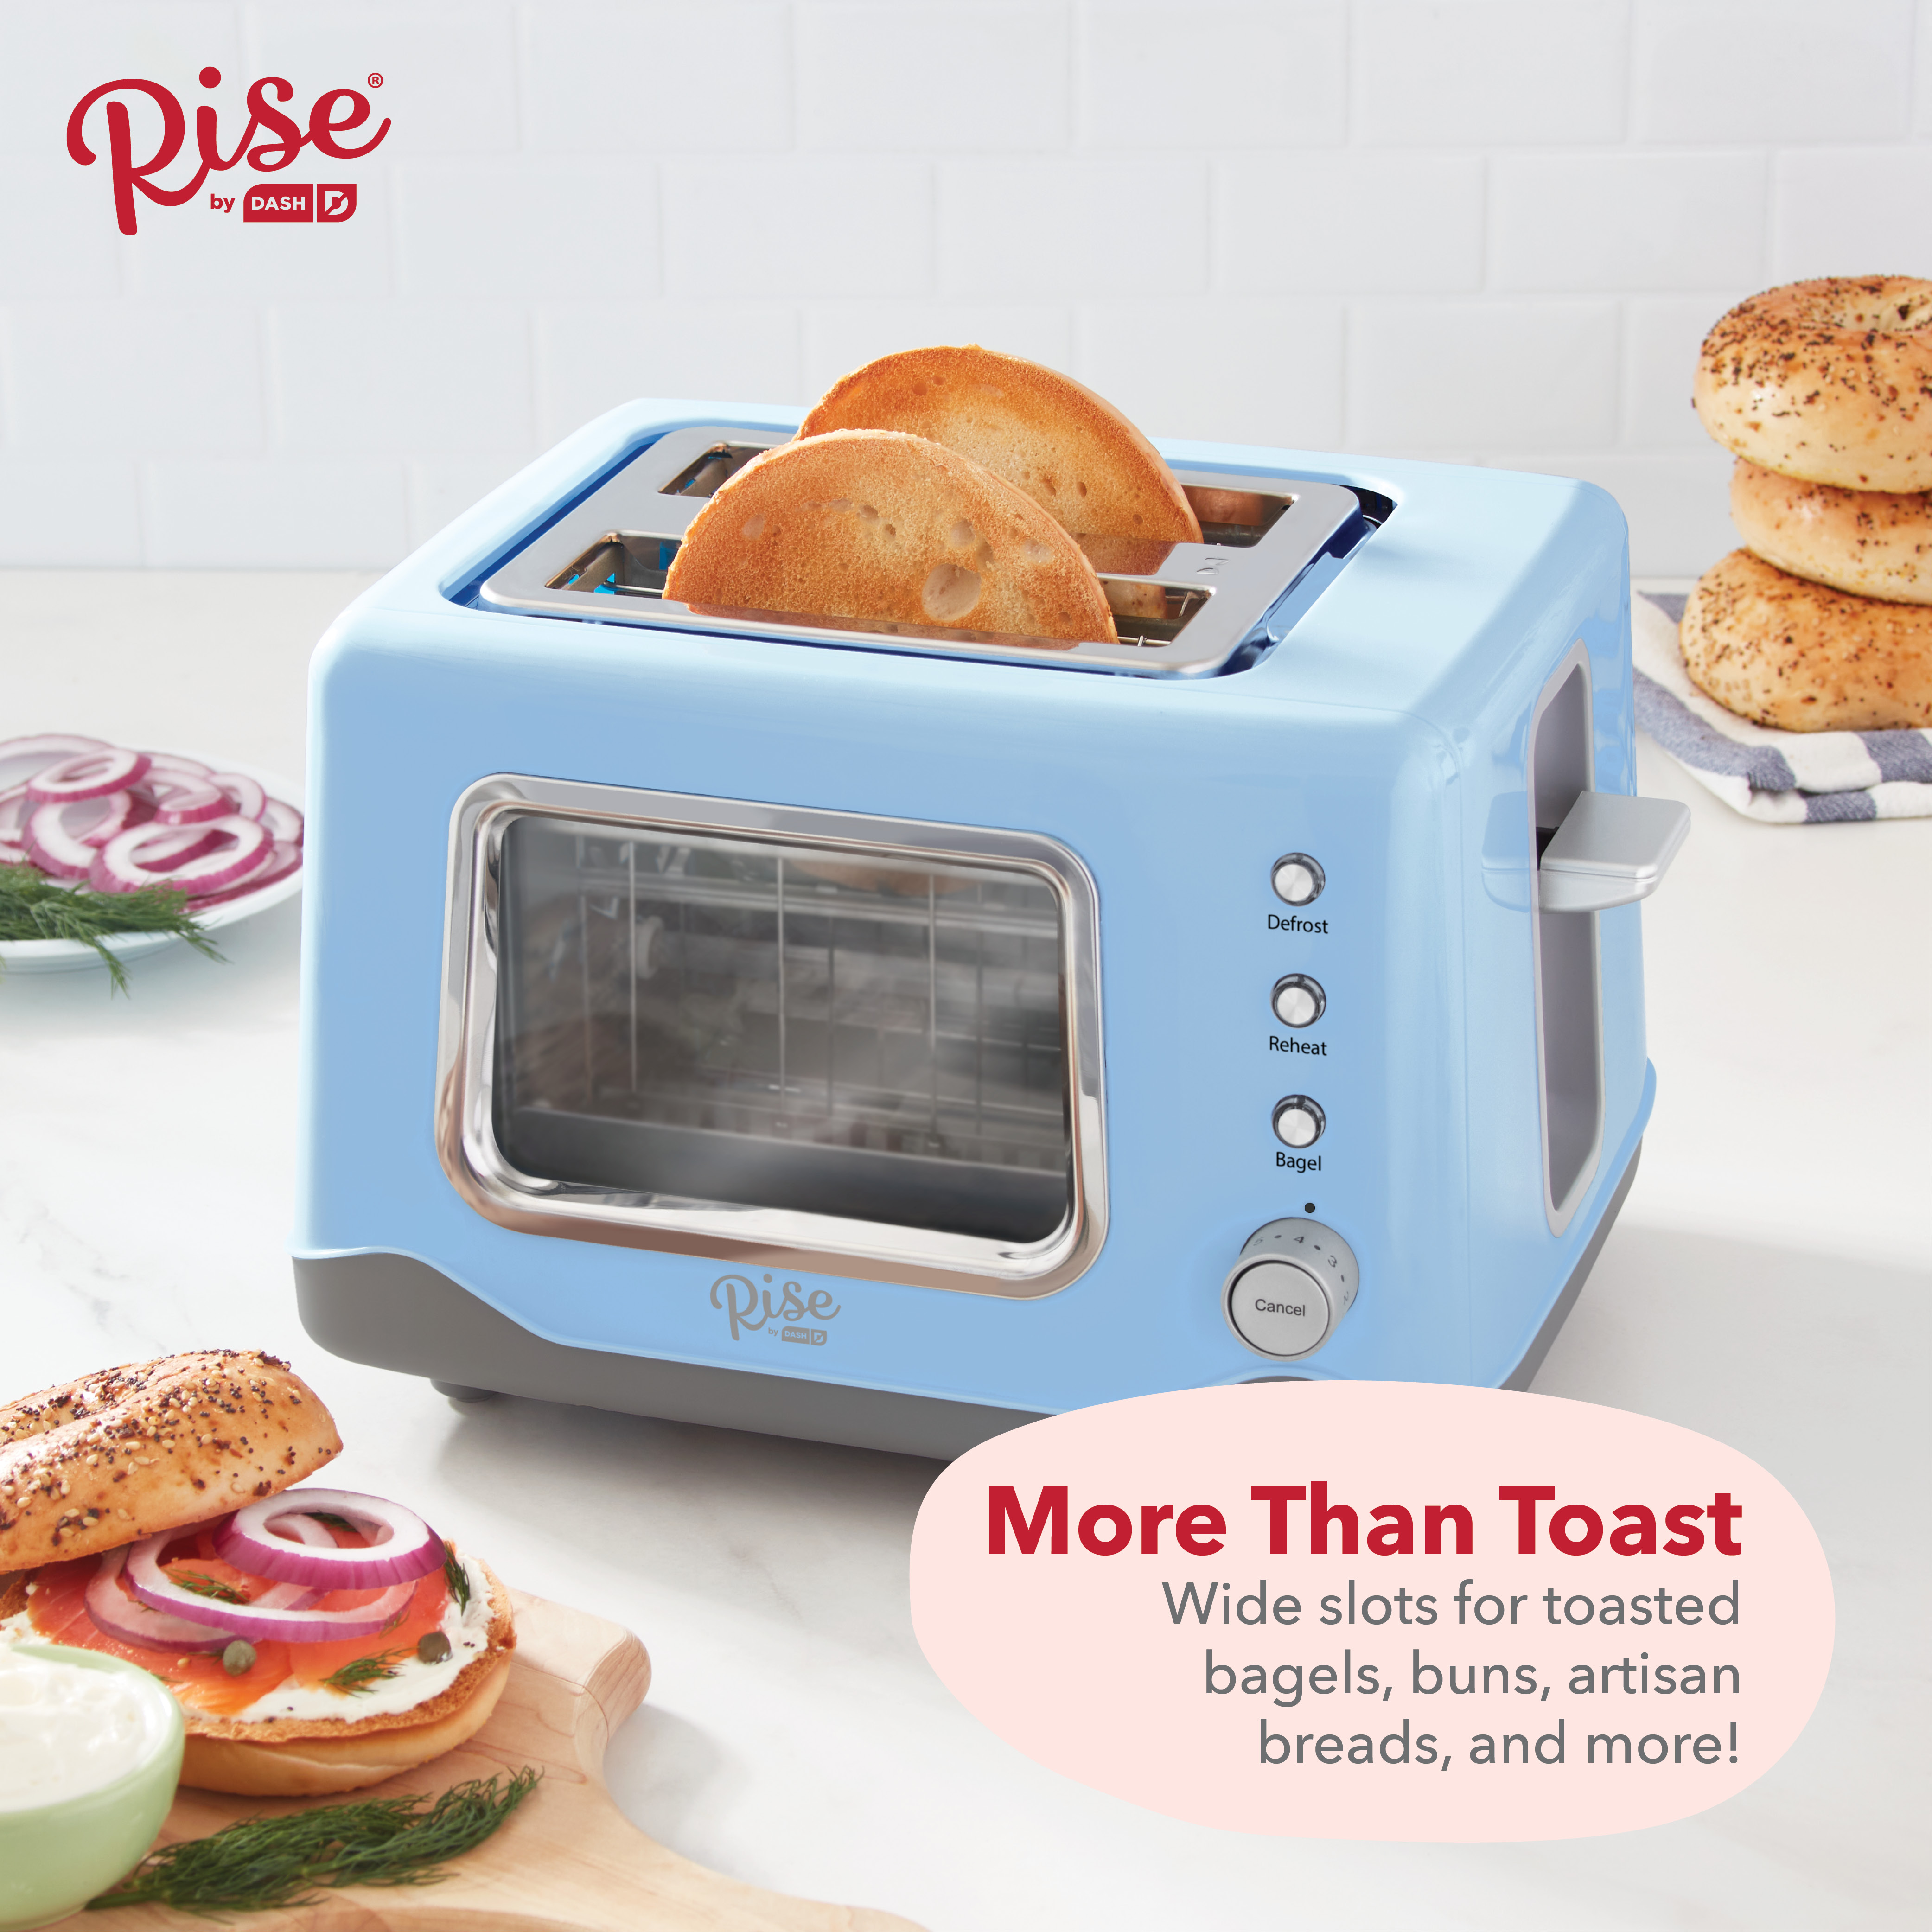 Rise by Dash Clear View Window 2-Slice Toaster Blue - Defrost, Reheat, Bagel, Auto Shut off, New - image 4 of 7